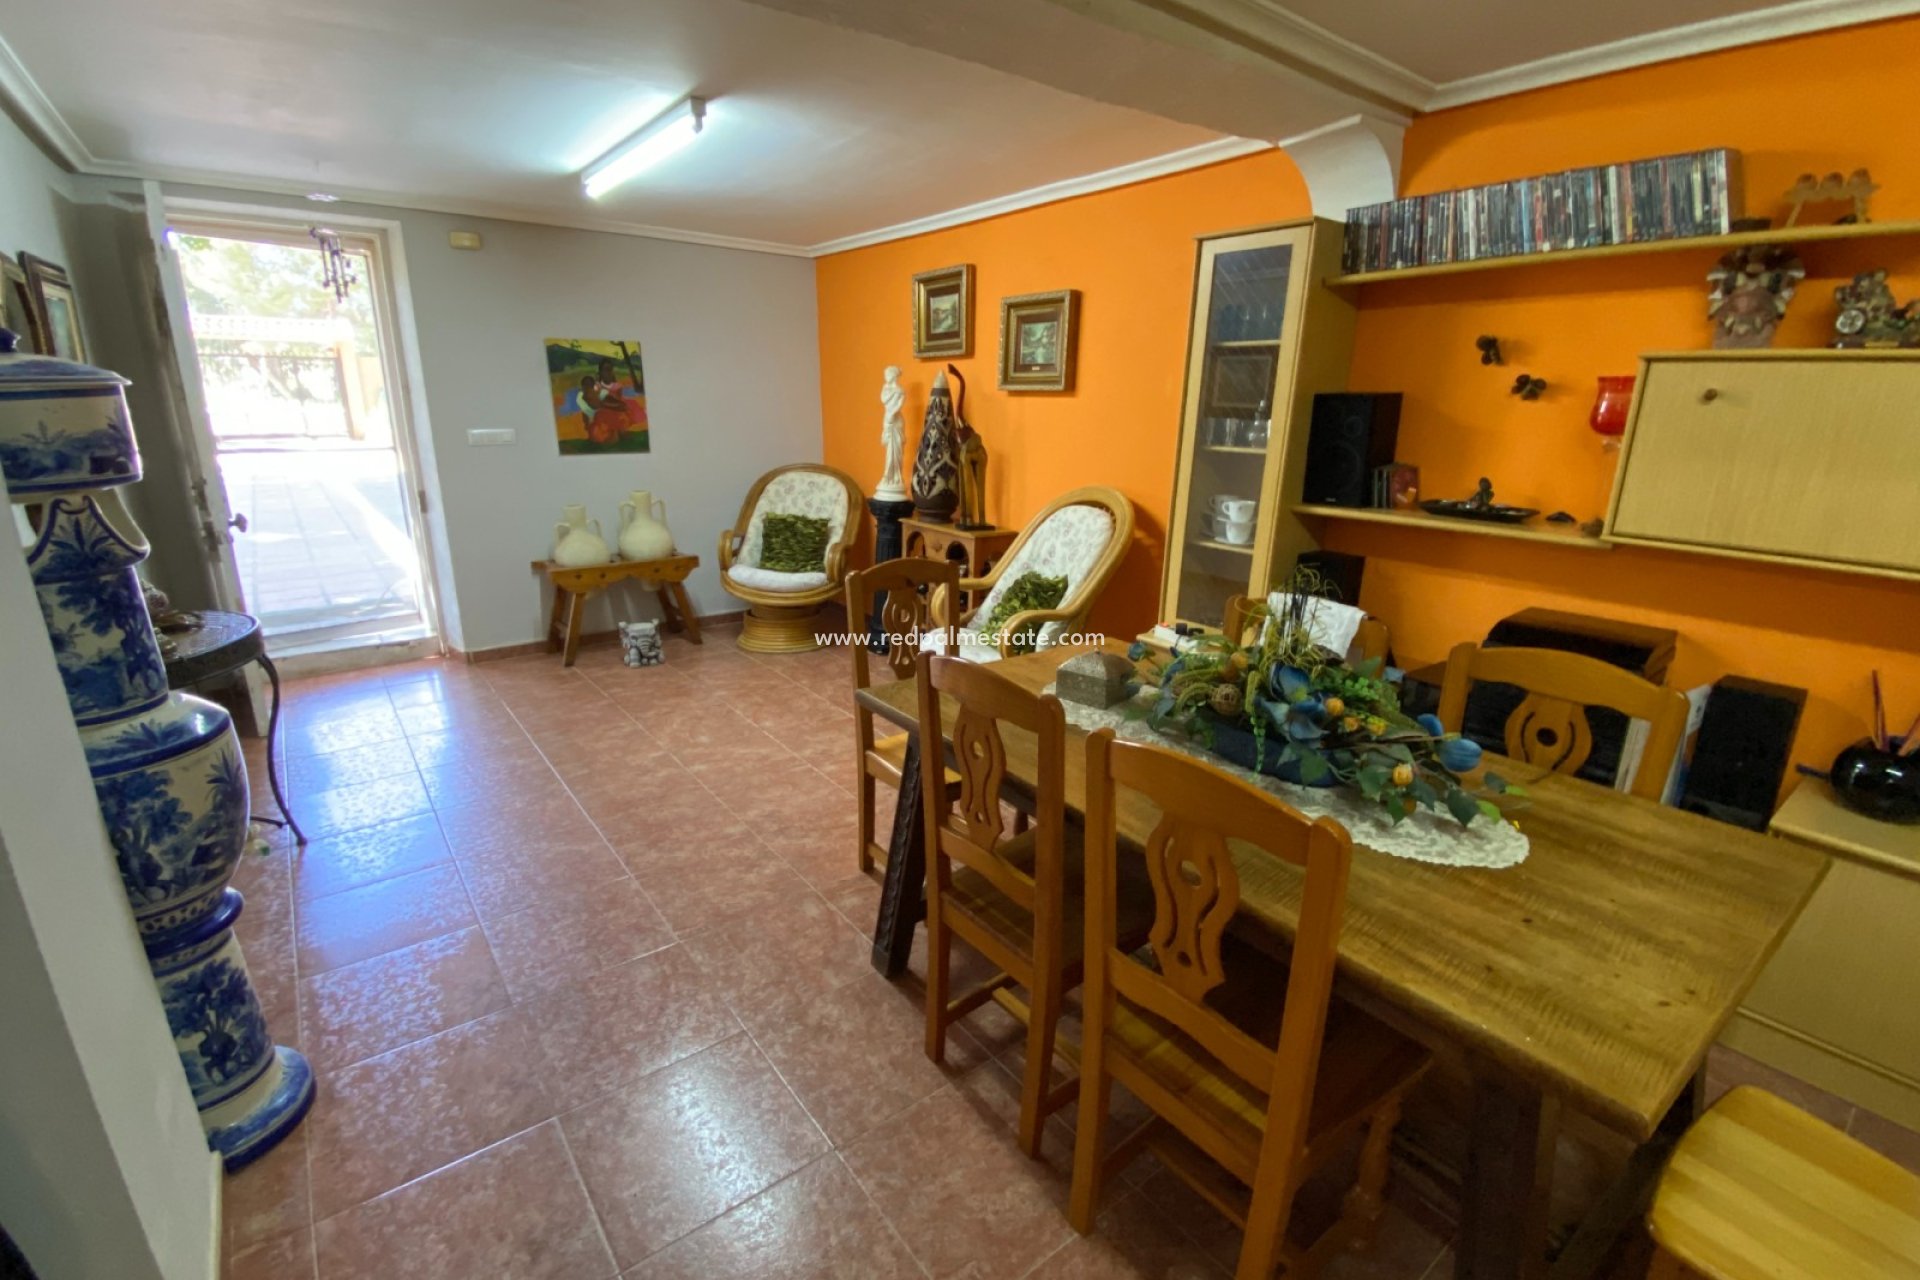 Resale - Country House -
Chinorlet